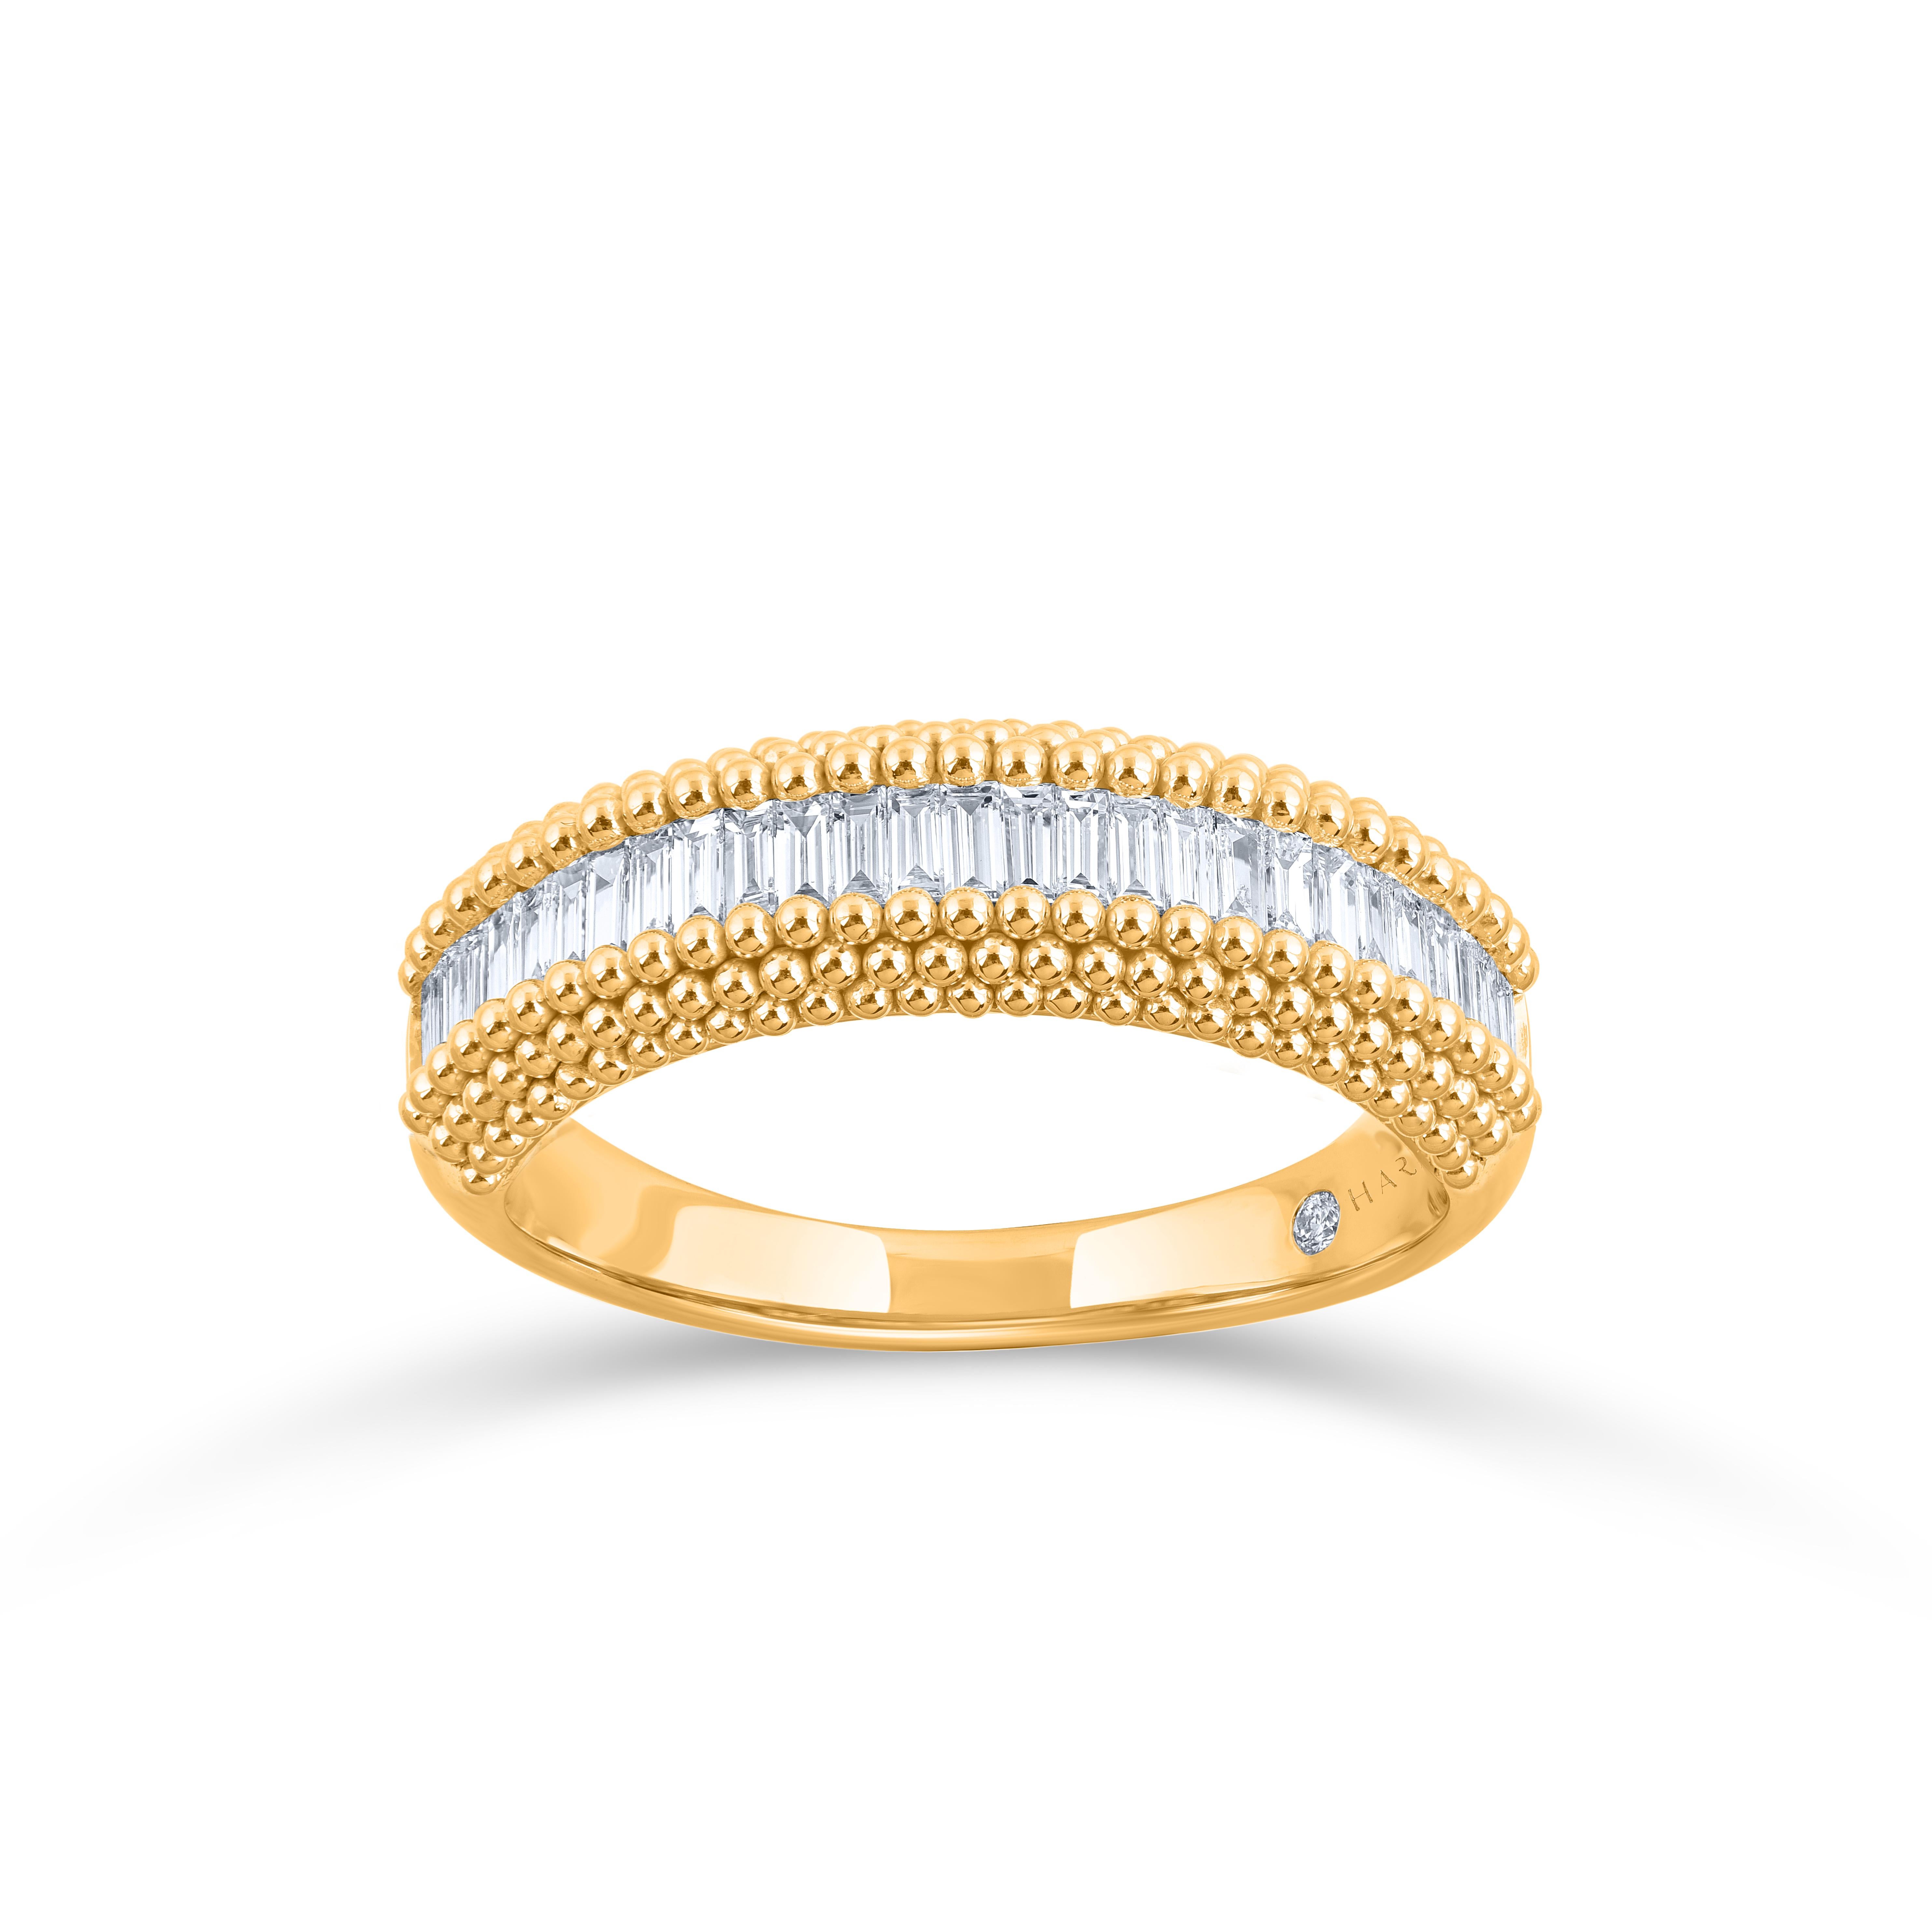 Set with 29 wide baguettes in channel setting vertically in yellow gold granulation border, and 1 brilliant cut diamond in the inner shank, this half eternity men's diamond ring is crafted in 18 KT yellow gold. The beauty of the ring is enhanced by